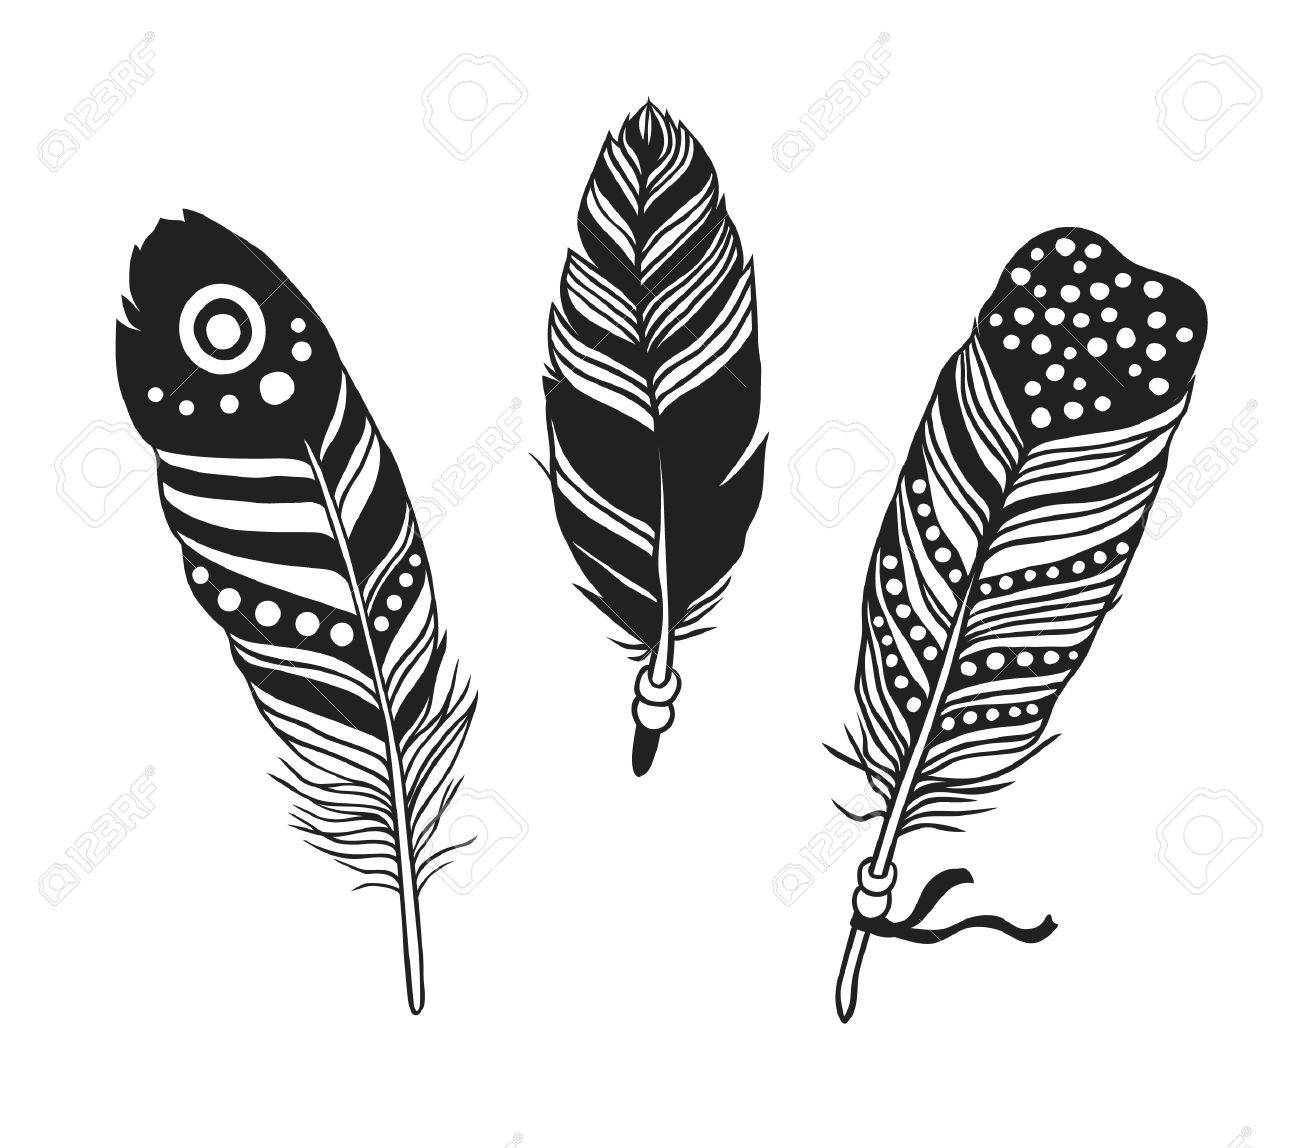 feathers clipart hipster